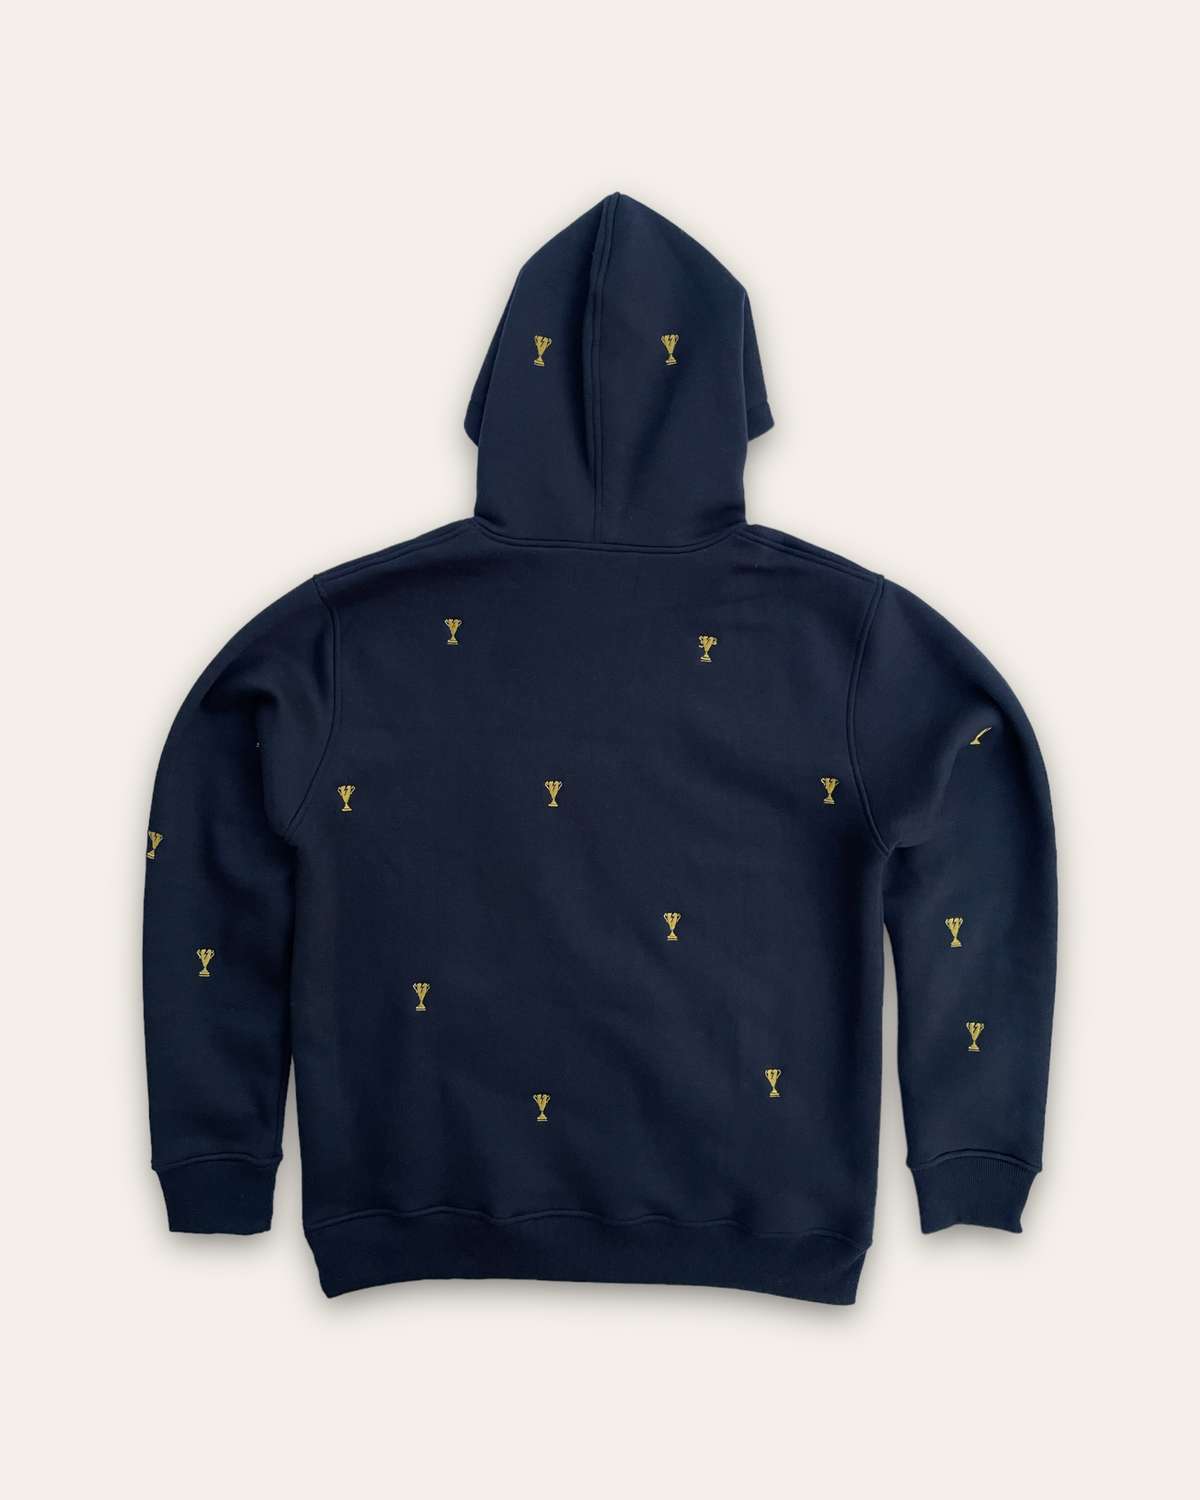 Trophies Embroidered Sweatsuit